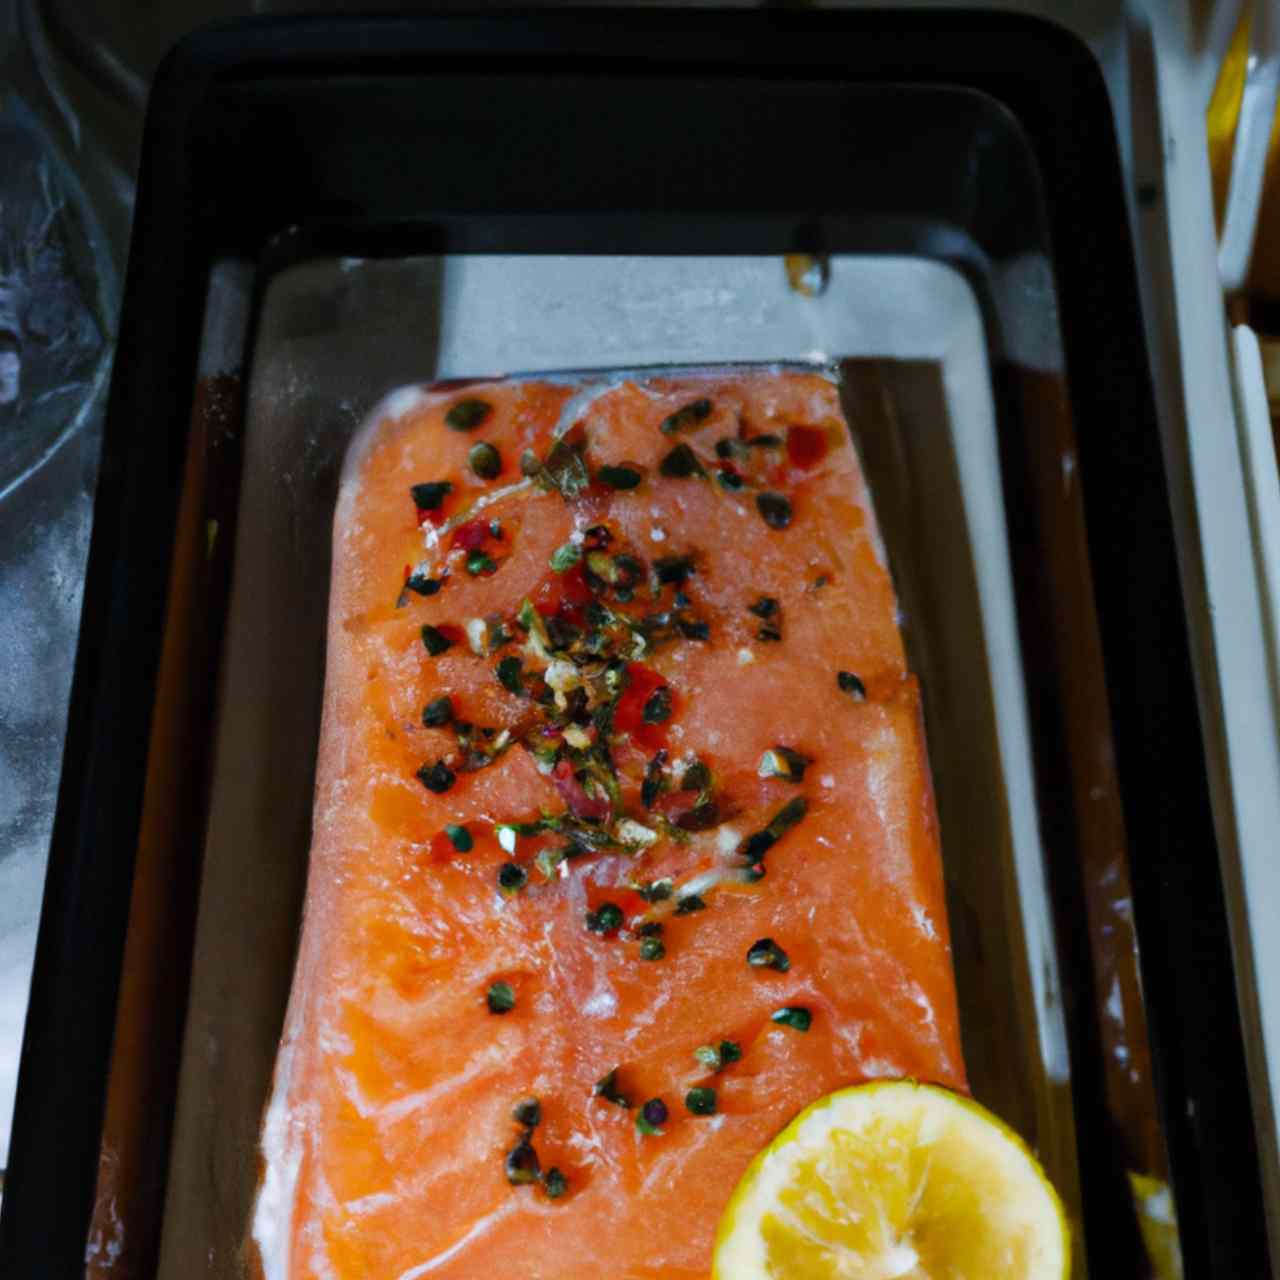 How Long Can You Keep Raw Salmon in the Fridge